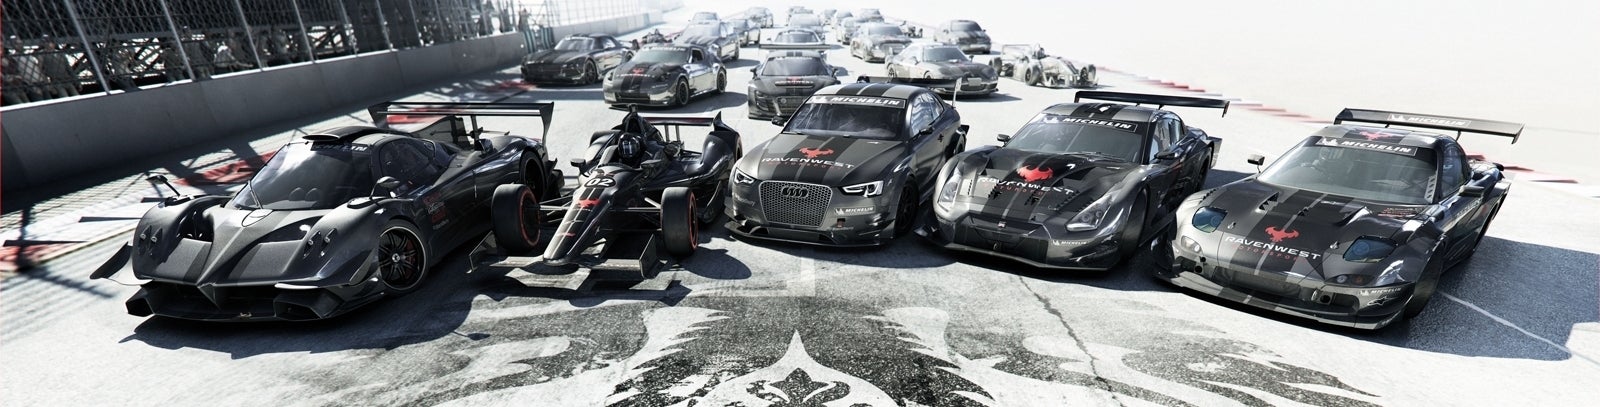 Image for Grid Autosport is the Codemasters racing game you've been waiting for